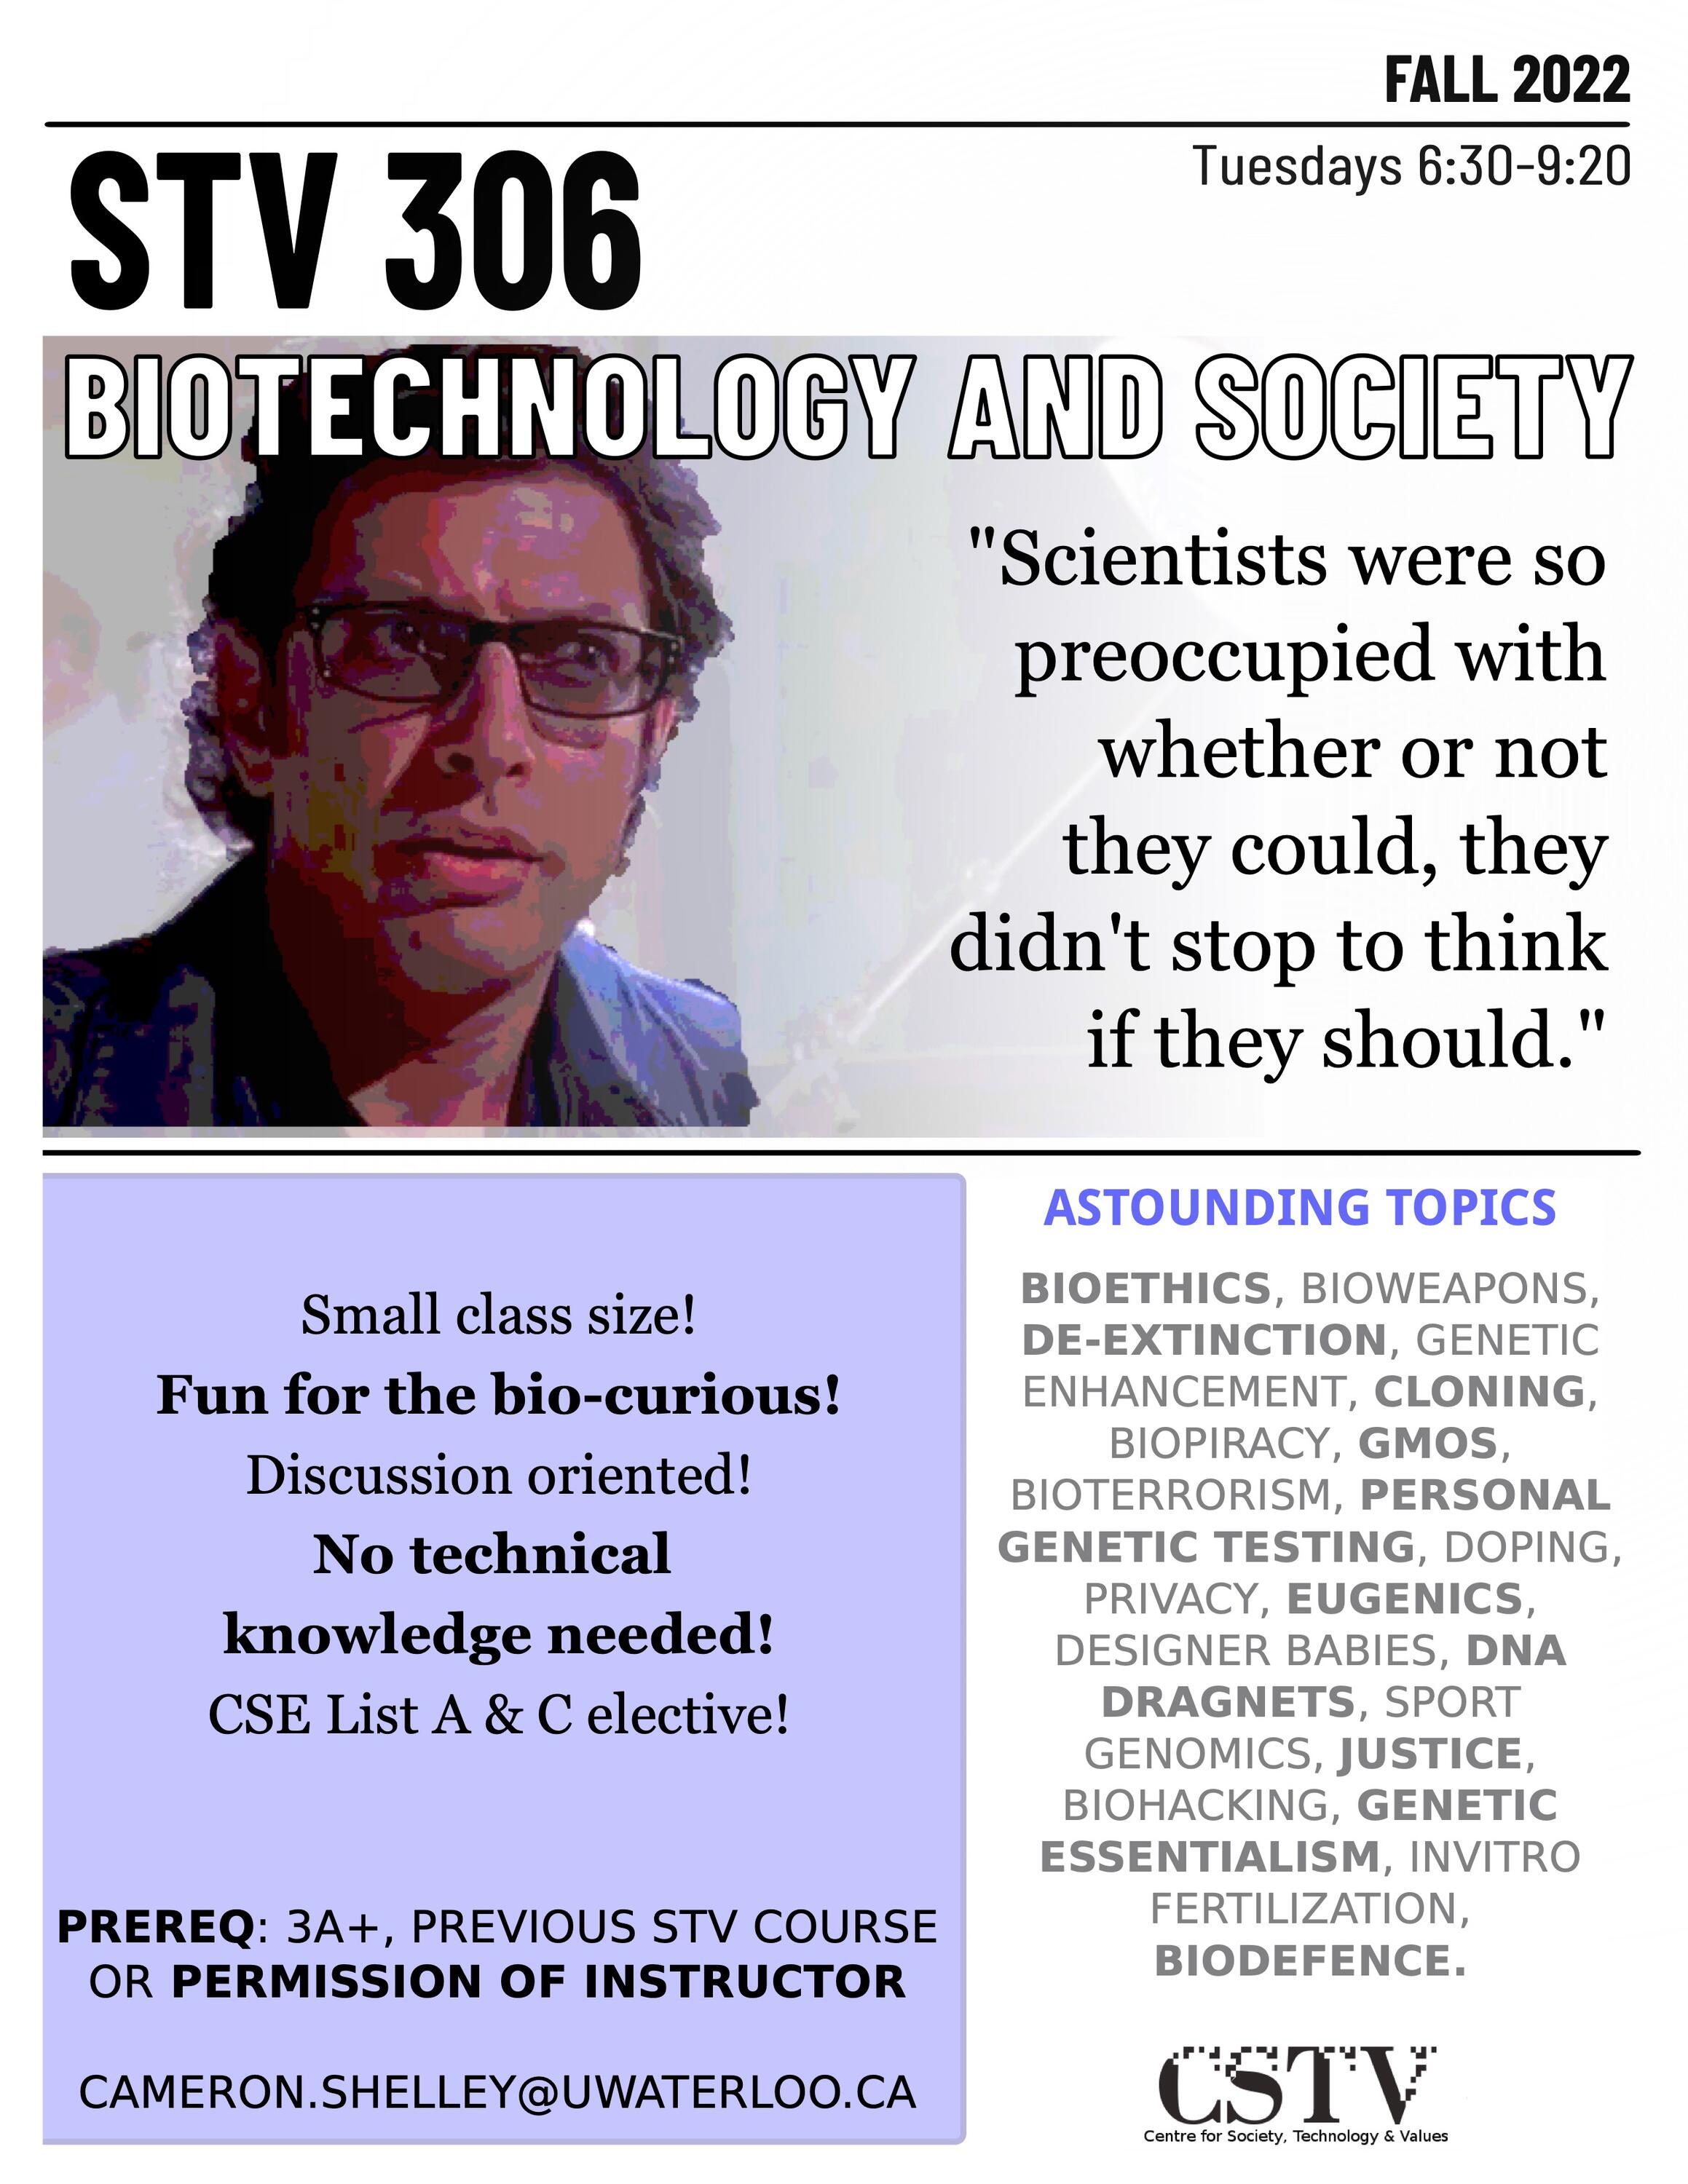 STV 306: Biotechnology and Society.  Offered in the Fall 2022 term. Features small class size! Fun for the bio-curious! Discussion oriented! No technical knowledge needed! This course is a CSE List A and List C elective!  Prerequisite is enrollment in 3A term or later, or a previous STV course or permission of your friendly instructor Cameron Shelley at cshelley@uwaterloo.ca. Potential topics include bioethics, bioweapons, de-extinction, genetic enhancement, cloning, biopiracy, GMOs, bioterrorism, personal genetic testing, doping, privacy, eugenics, designer babies, DNA dragnets, sport, genomics, justice, biohacking, in-vitro fertilzatation, biodefence and biosecurity.